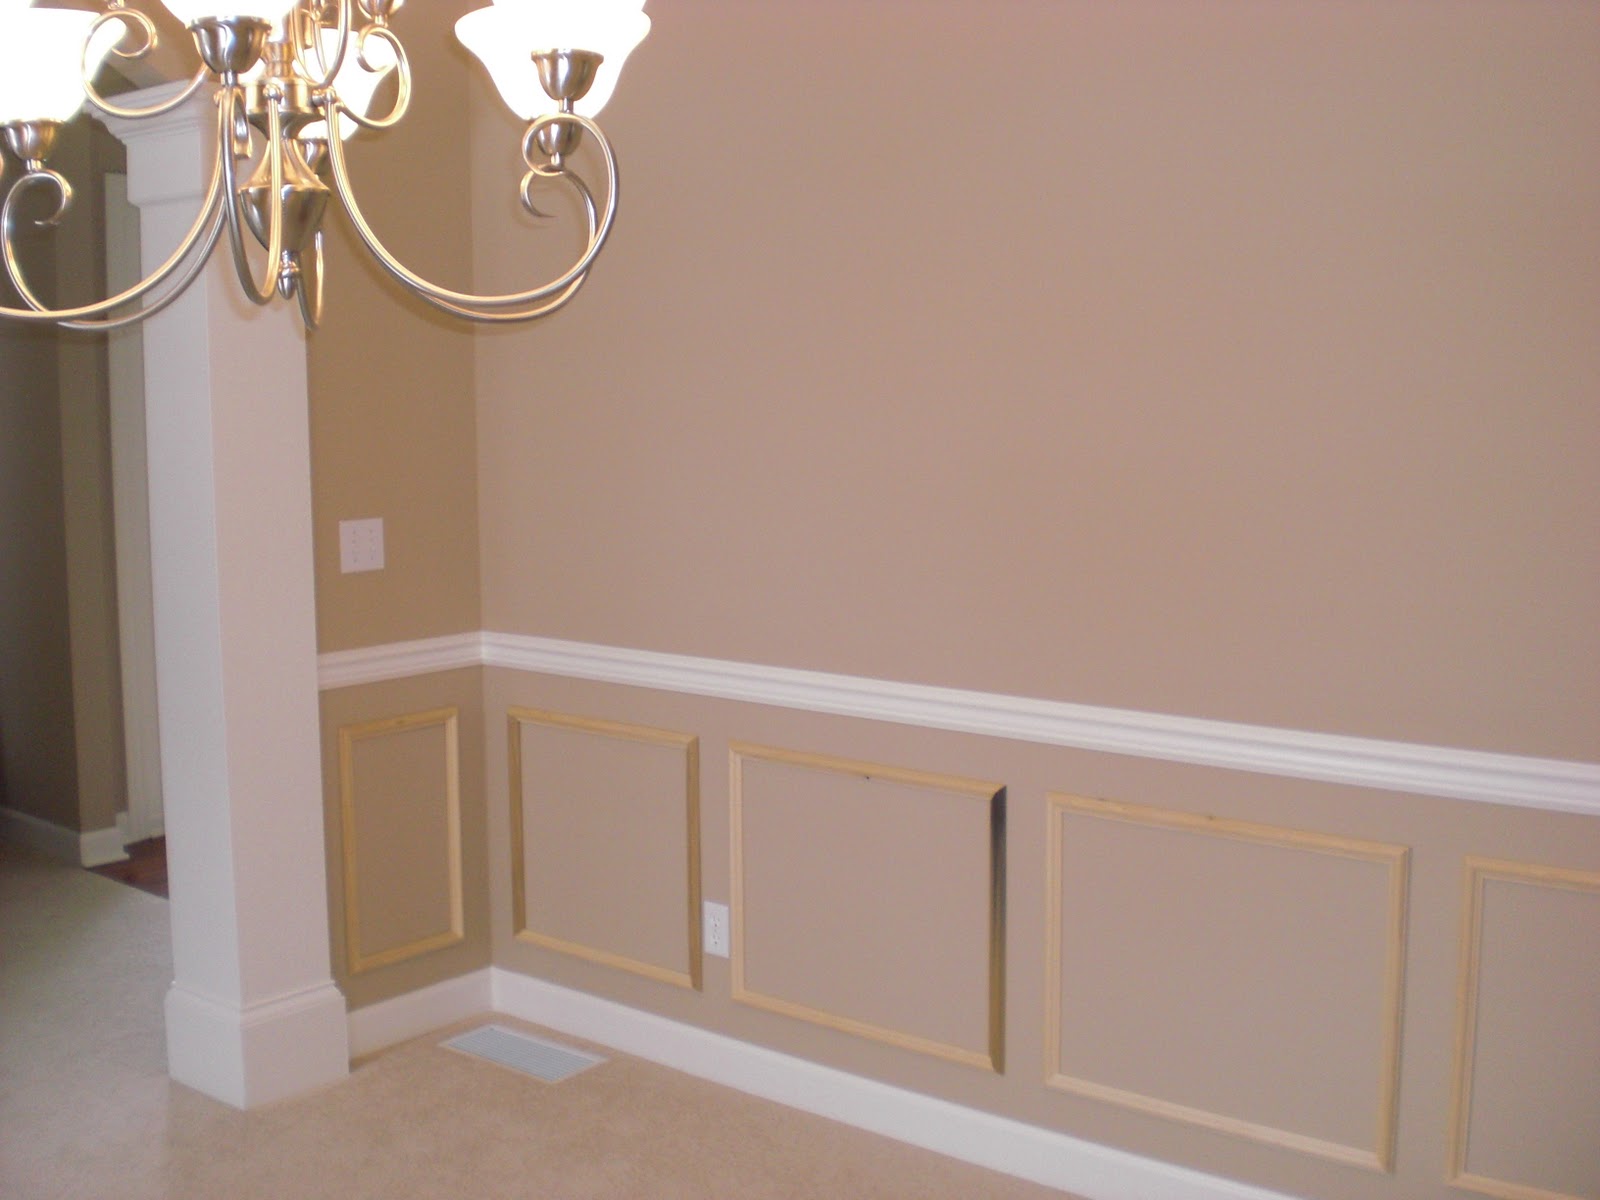 DIY Wainscoting With Textured Wallpaper  Practically Functional